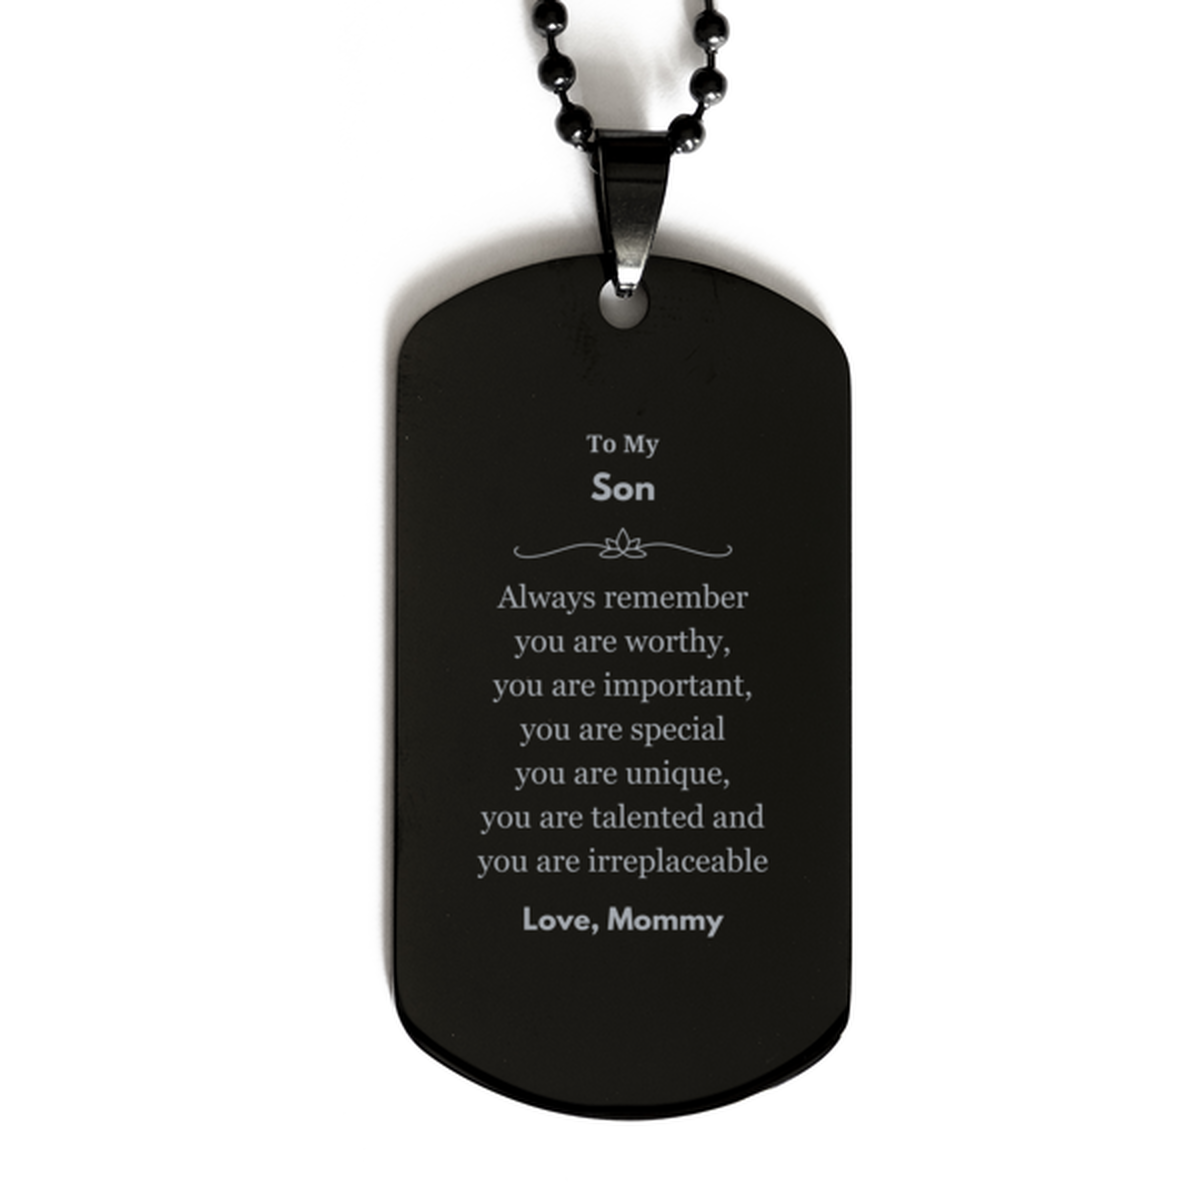 Son Birthday Gifts from Mommy, Inspirational Black Dog Tag for Son Christmas Graduation Gifts for Son Always remember you are worthy, you are important. Love, Mommy